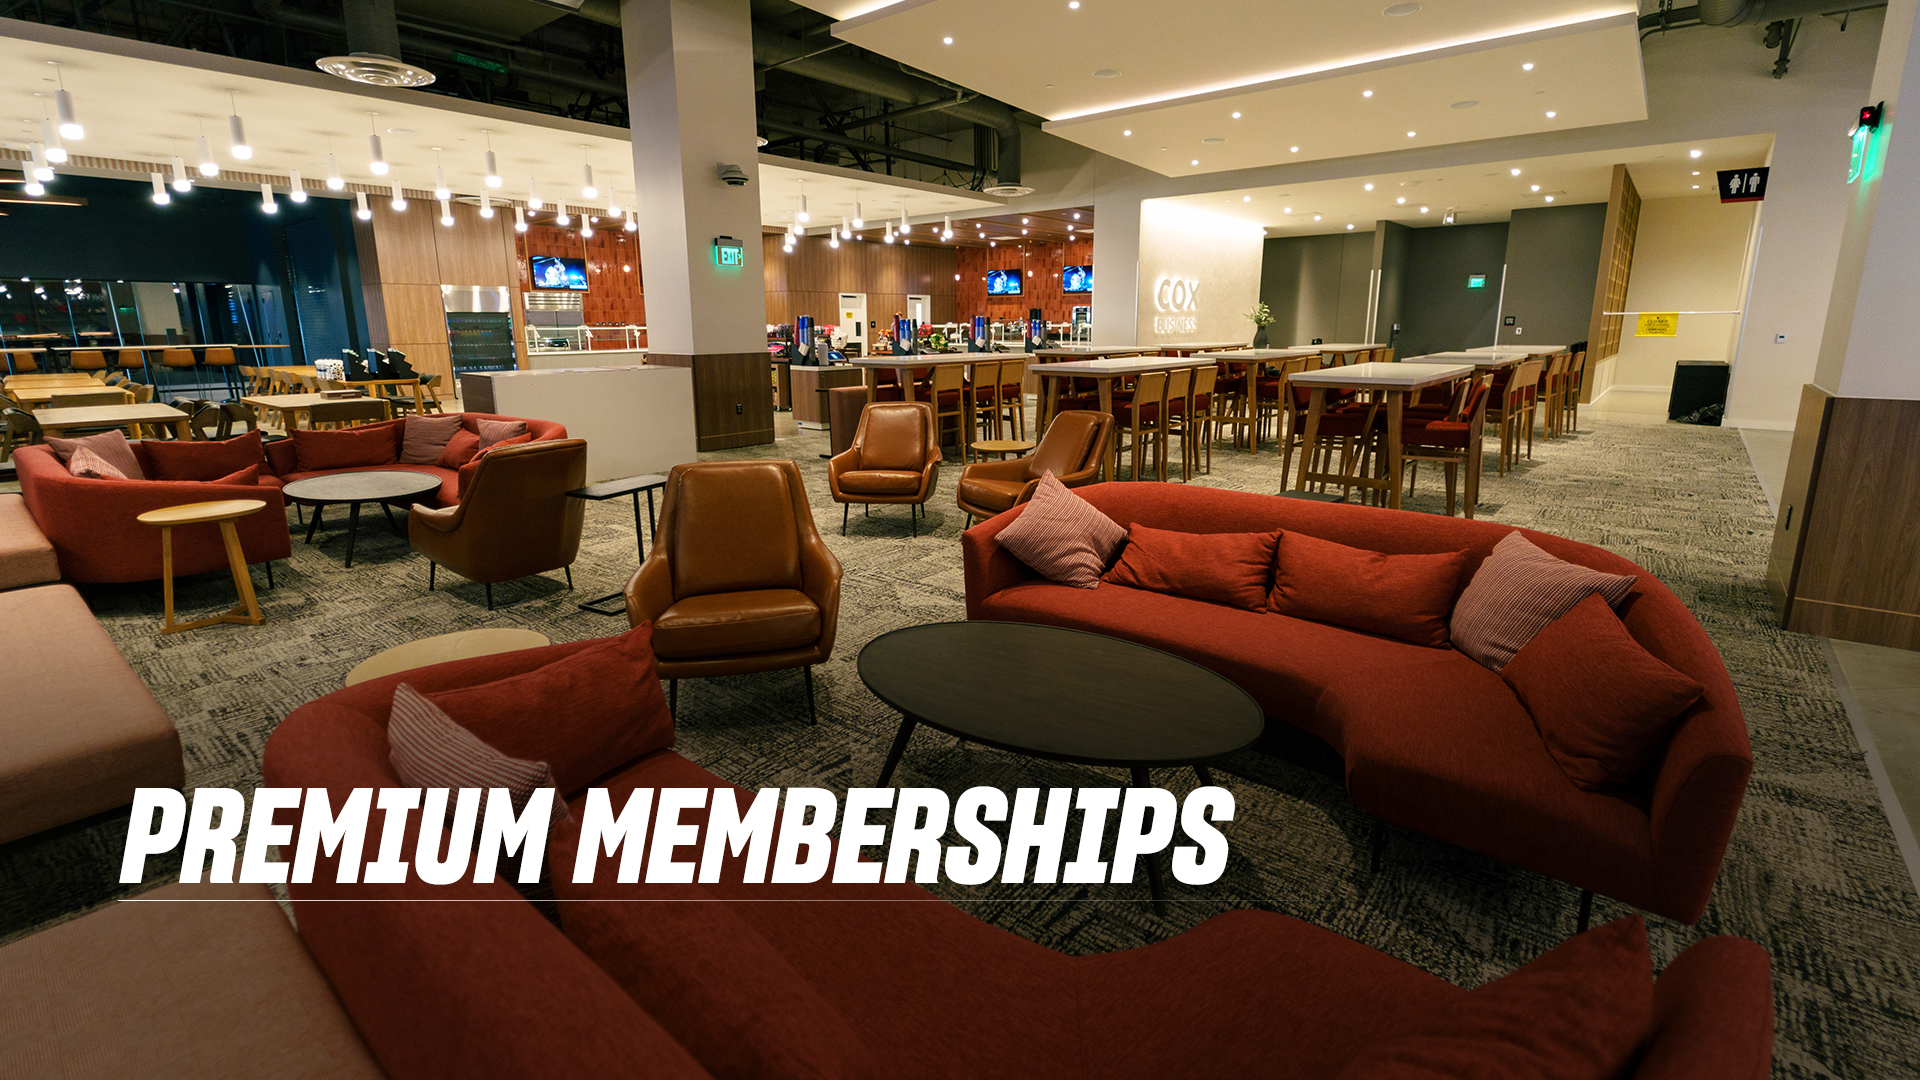 Photo of a premium experience at Snapdragon Stadium with text that says "Premium Memberships"